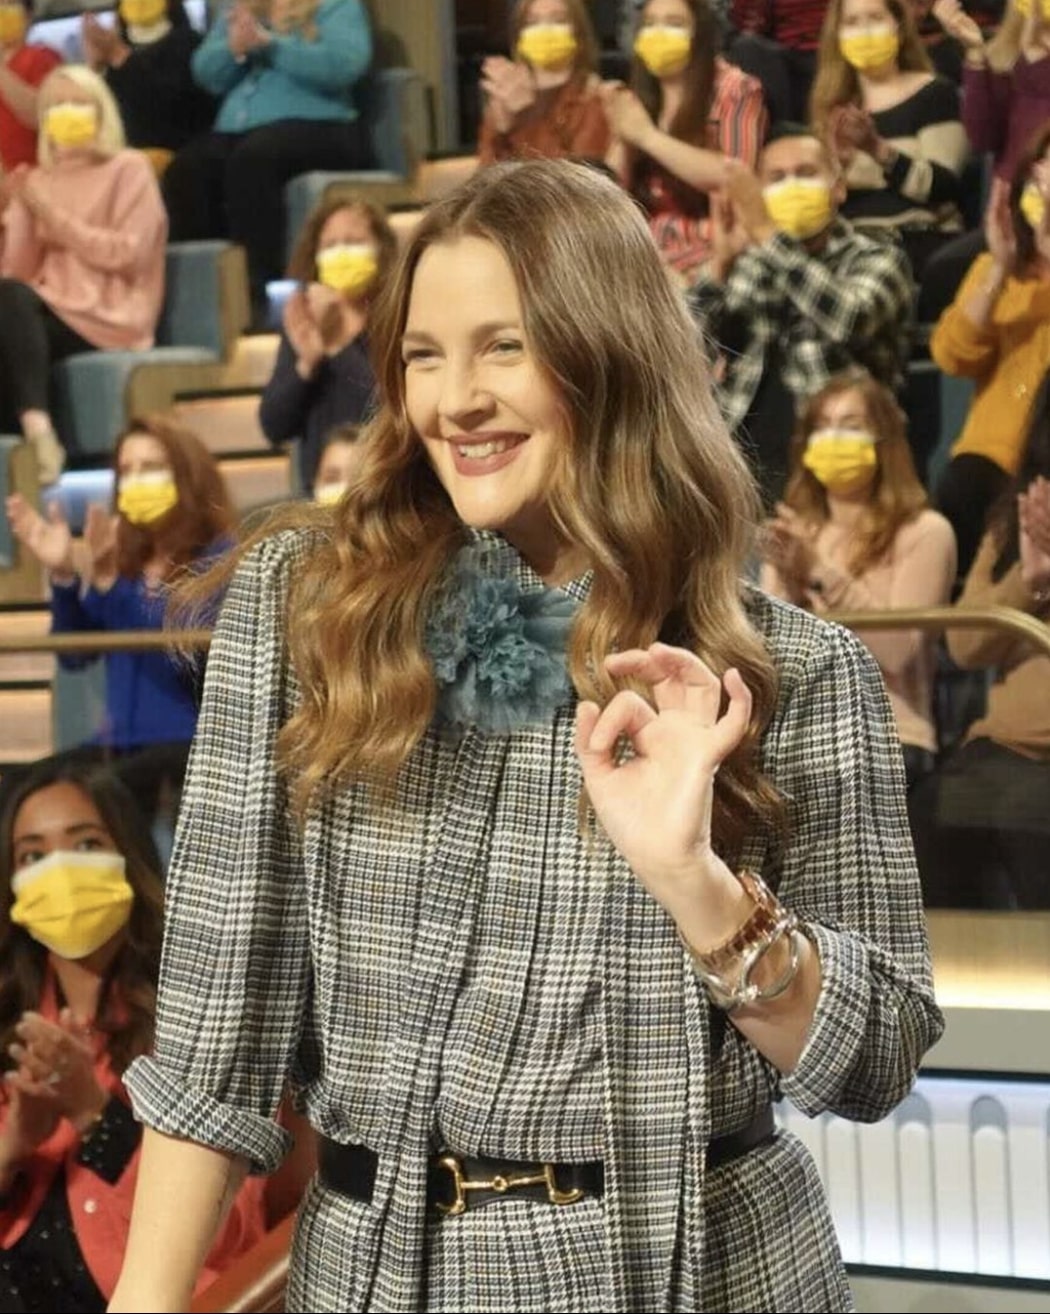 『The Drew Barrymore Show』でのドリュー（画像は『The Drew Barrymore Show　2022年8月22日付Instagram「Don’t freak out, but we just released tickets to be a part of our studio audience!」』のスクリーンショット）